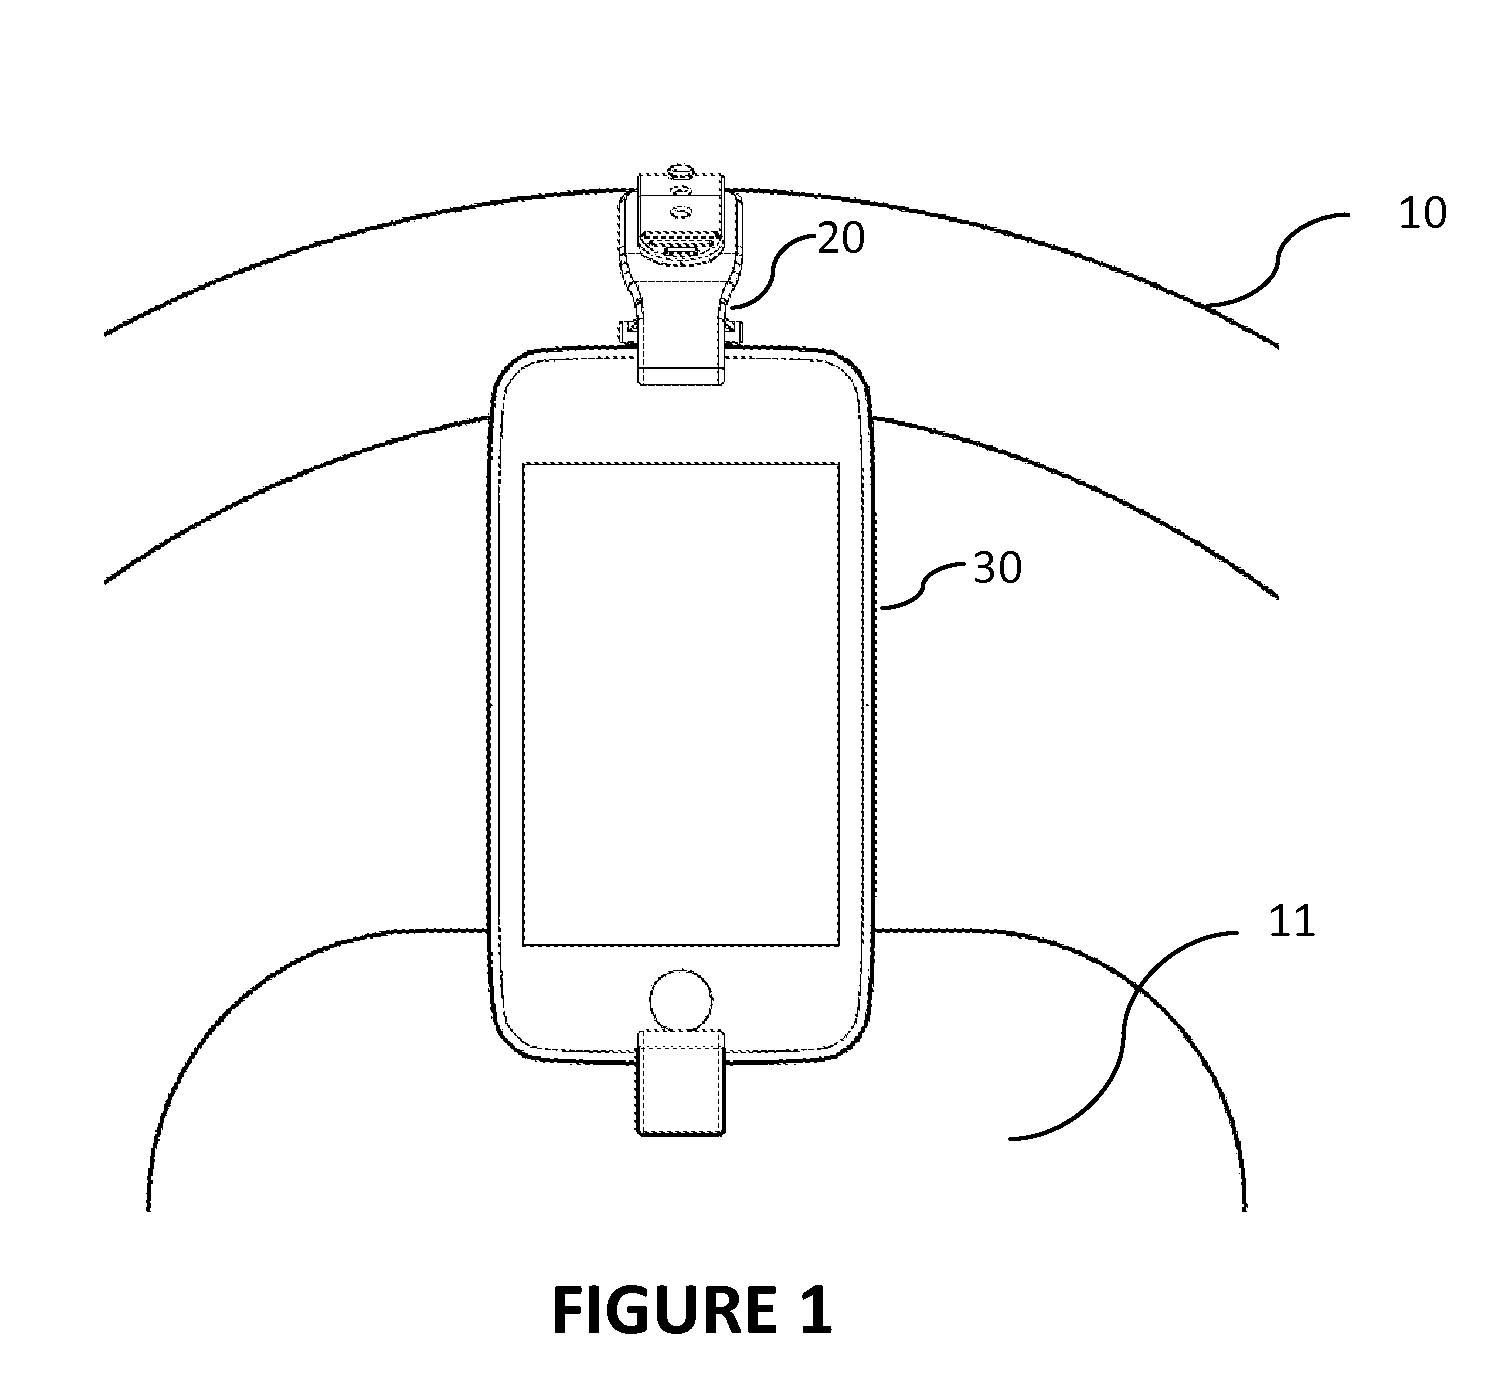 Removable steering wheel holder for an electronic device